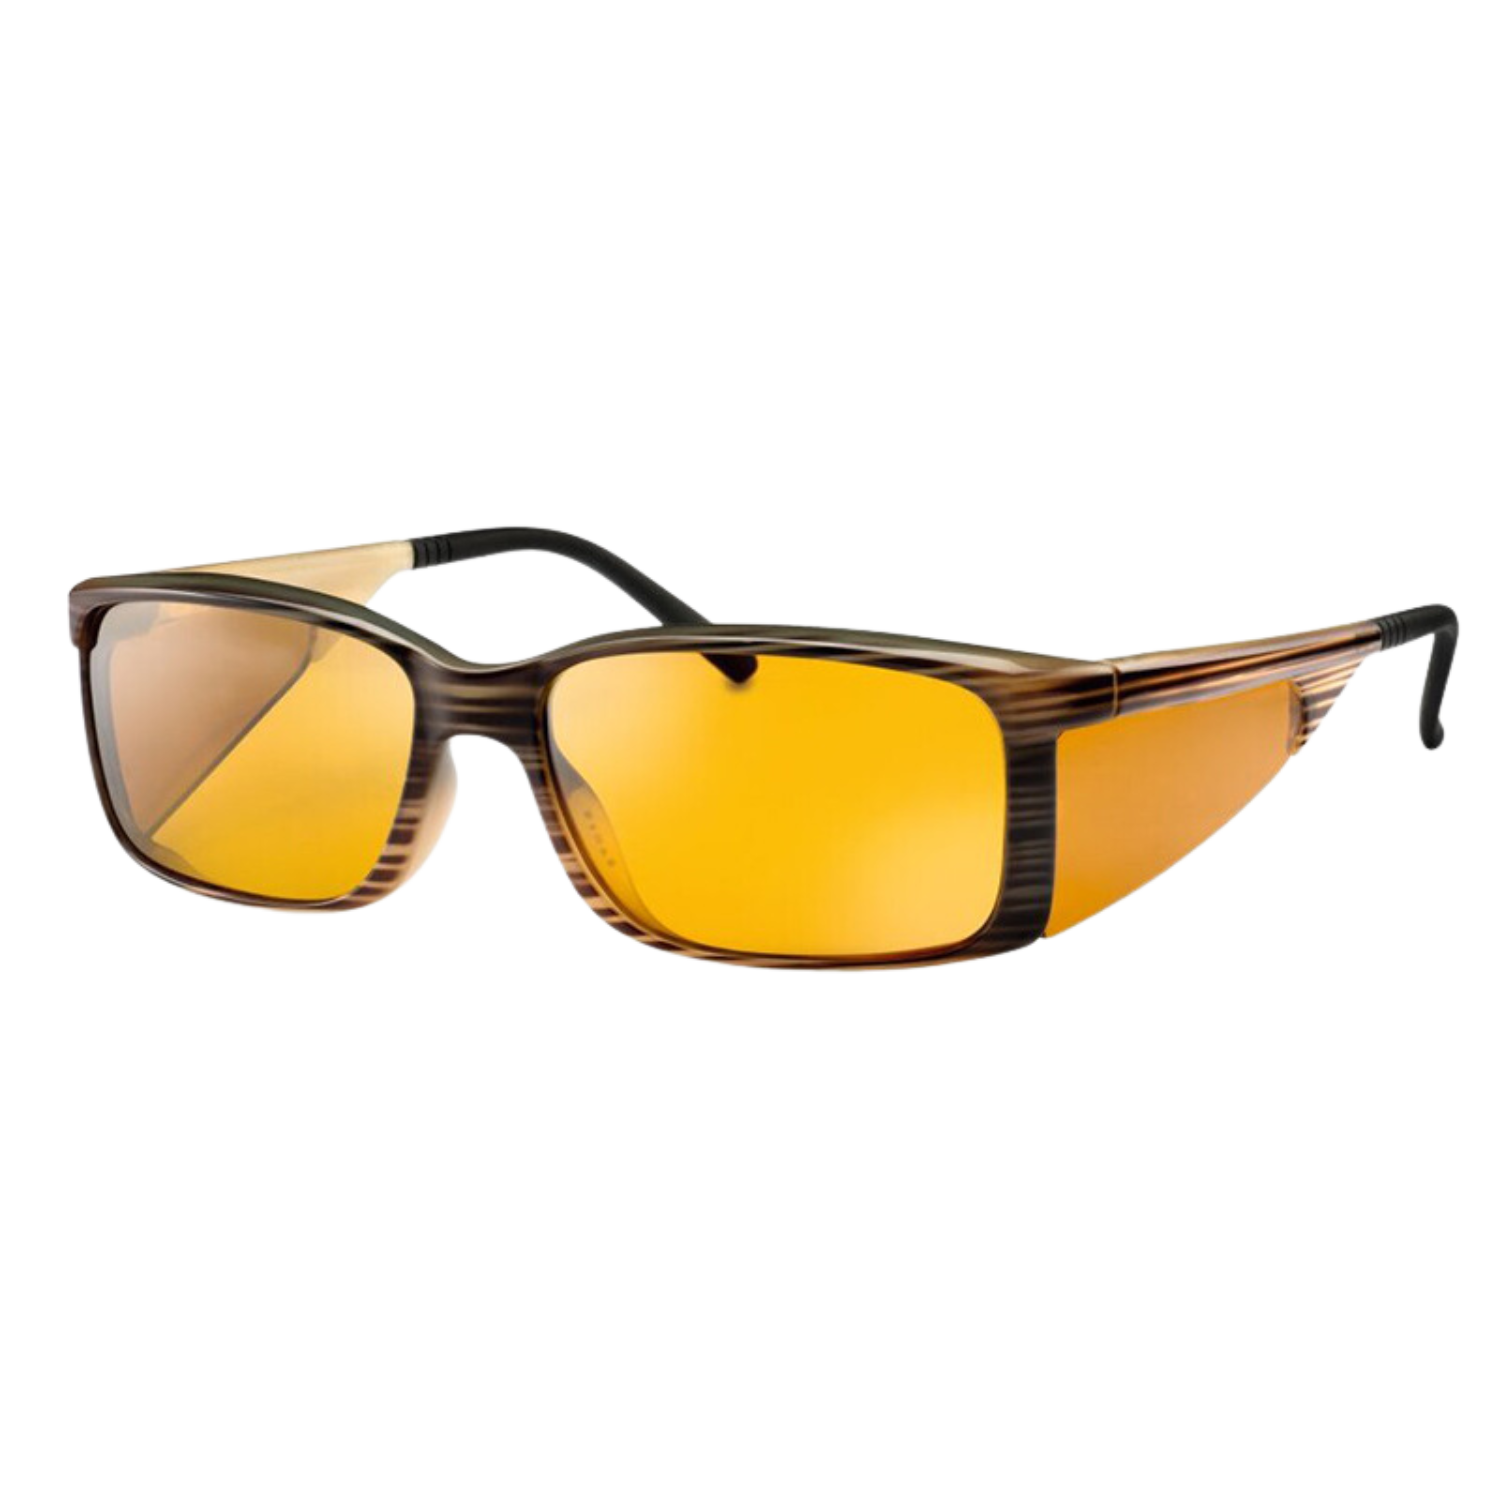 Image of the XL Unisex Ambelis blue light glasses with black/brown frames and amber tint.